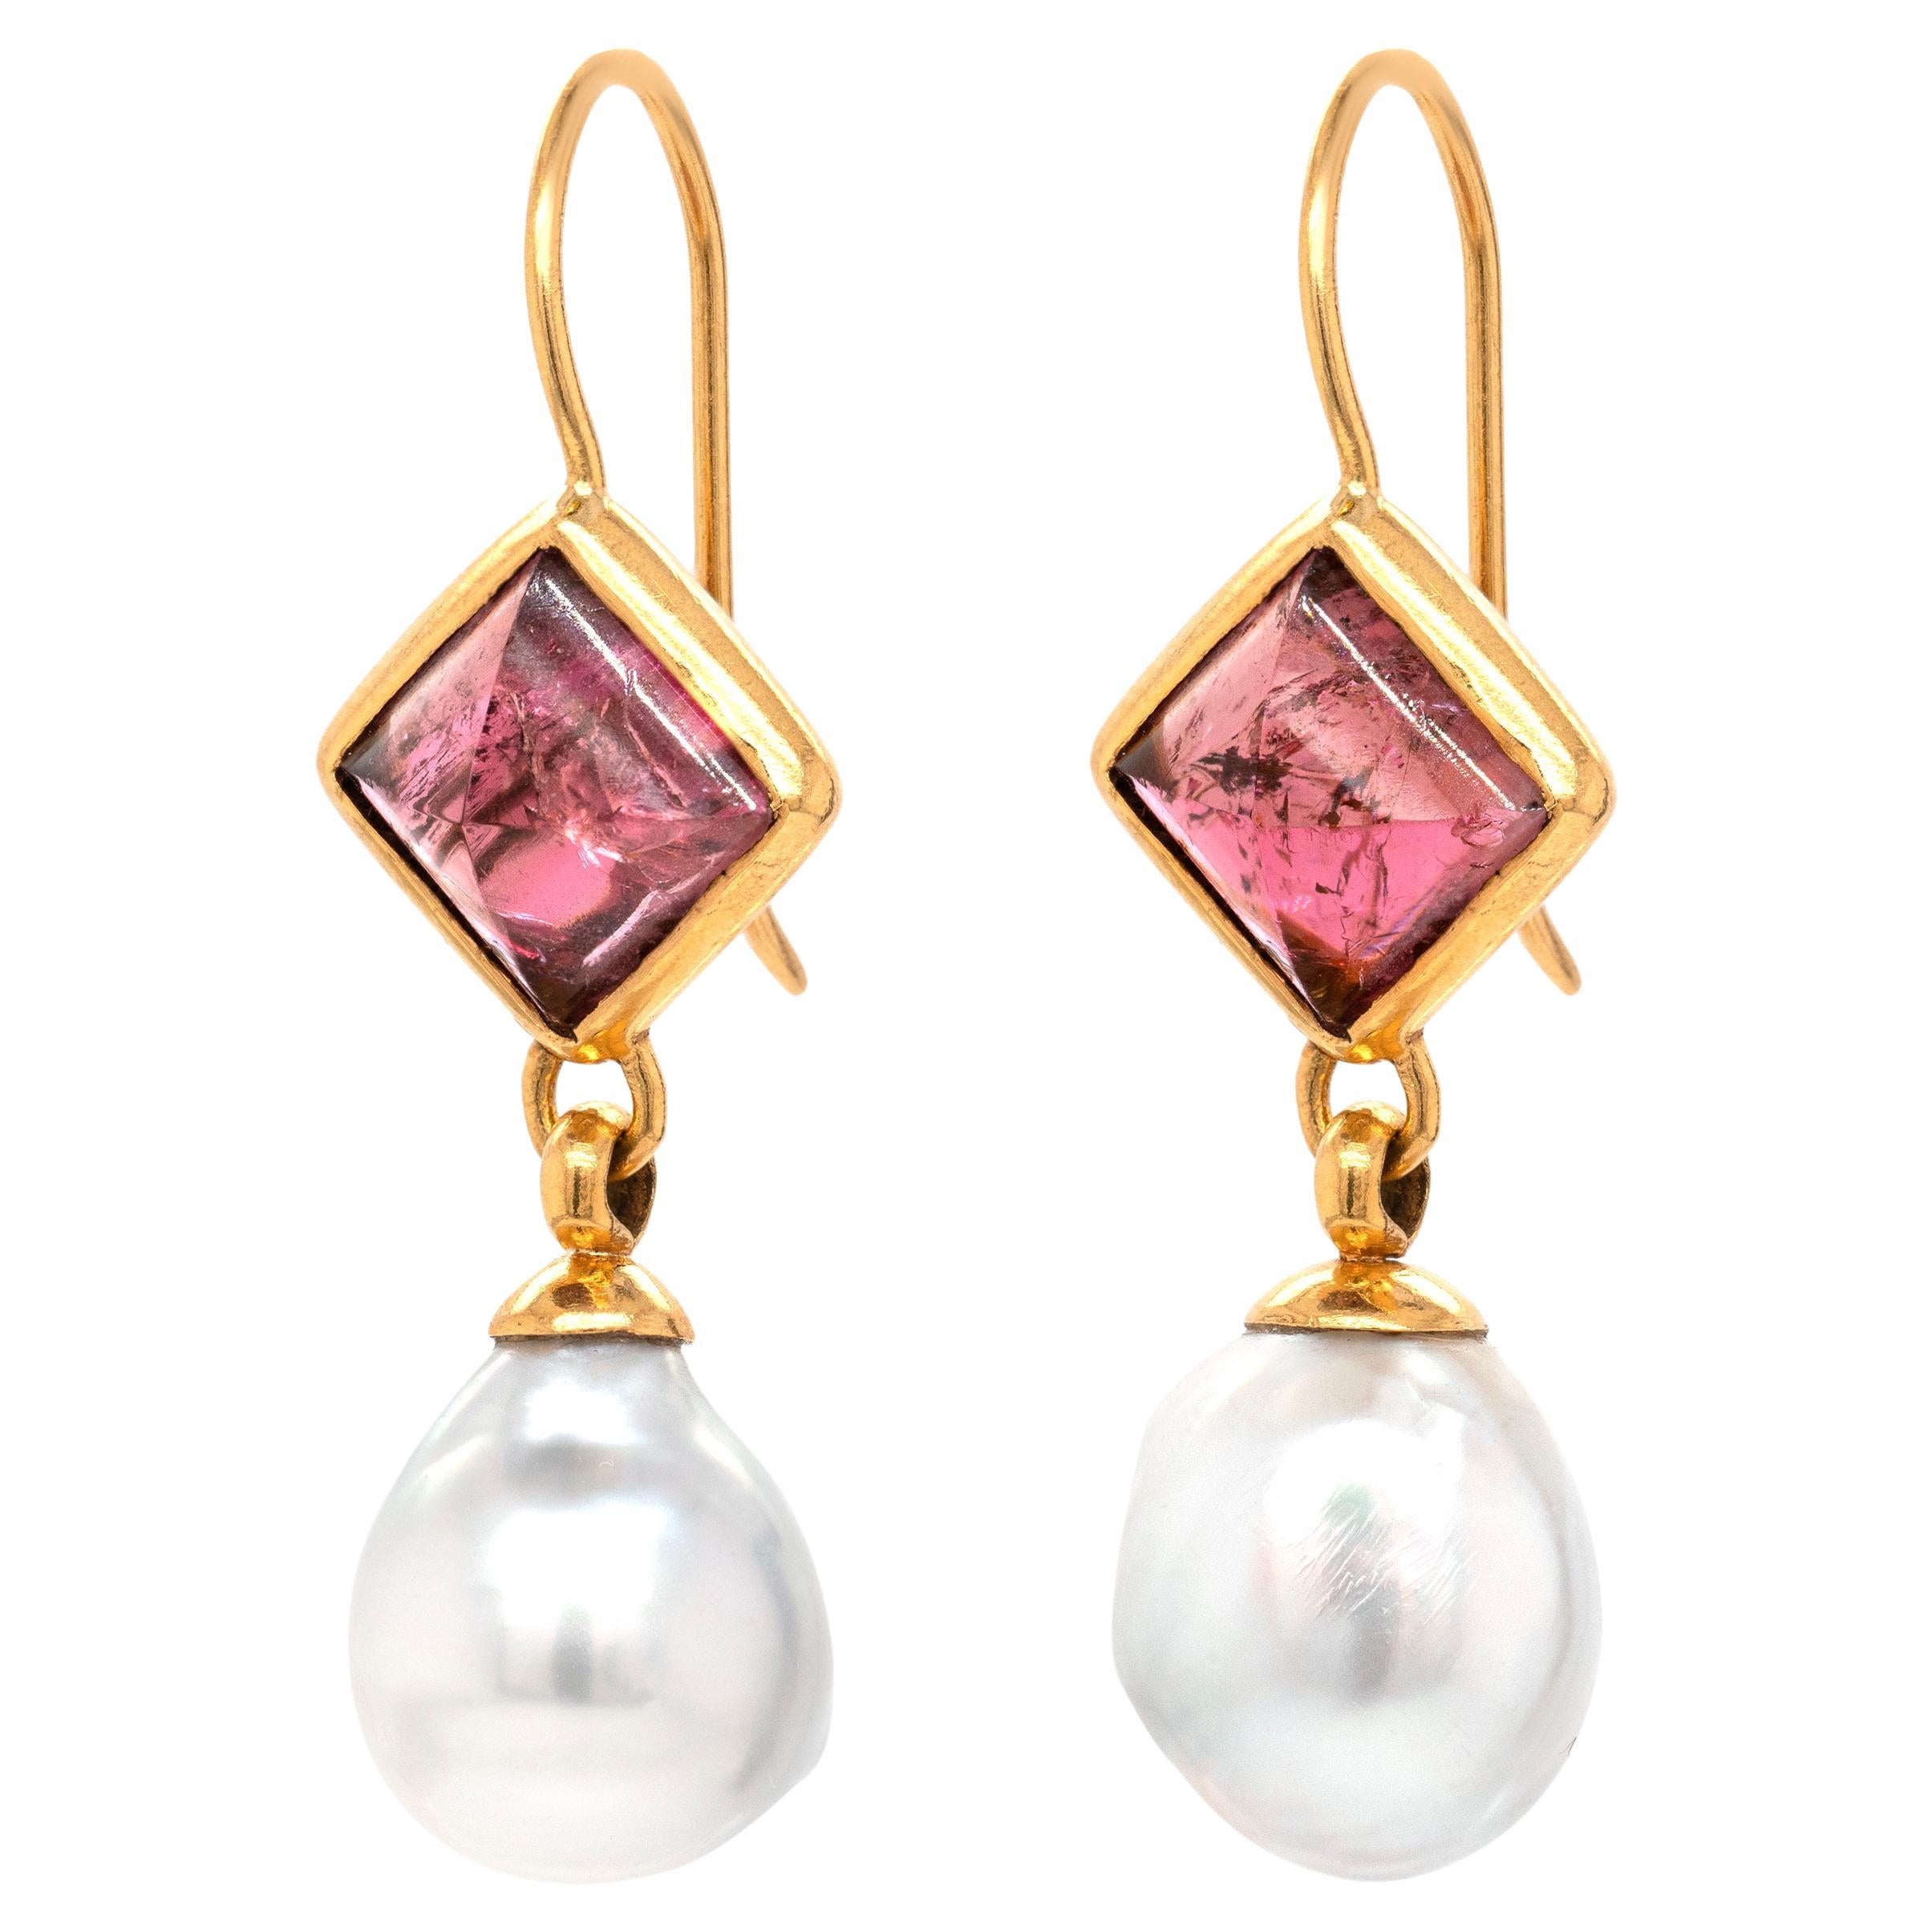 21 Carat South Sea Pearl and Pink Pyramid Cabouchon Tourmaline Drop Earrings For Sale